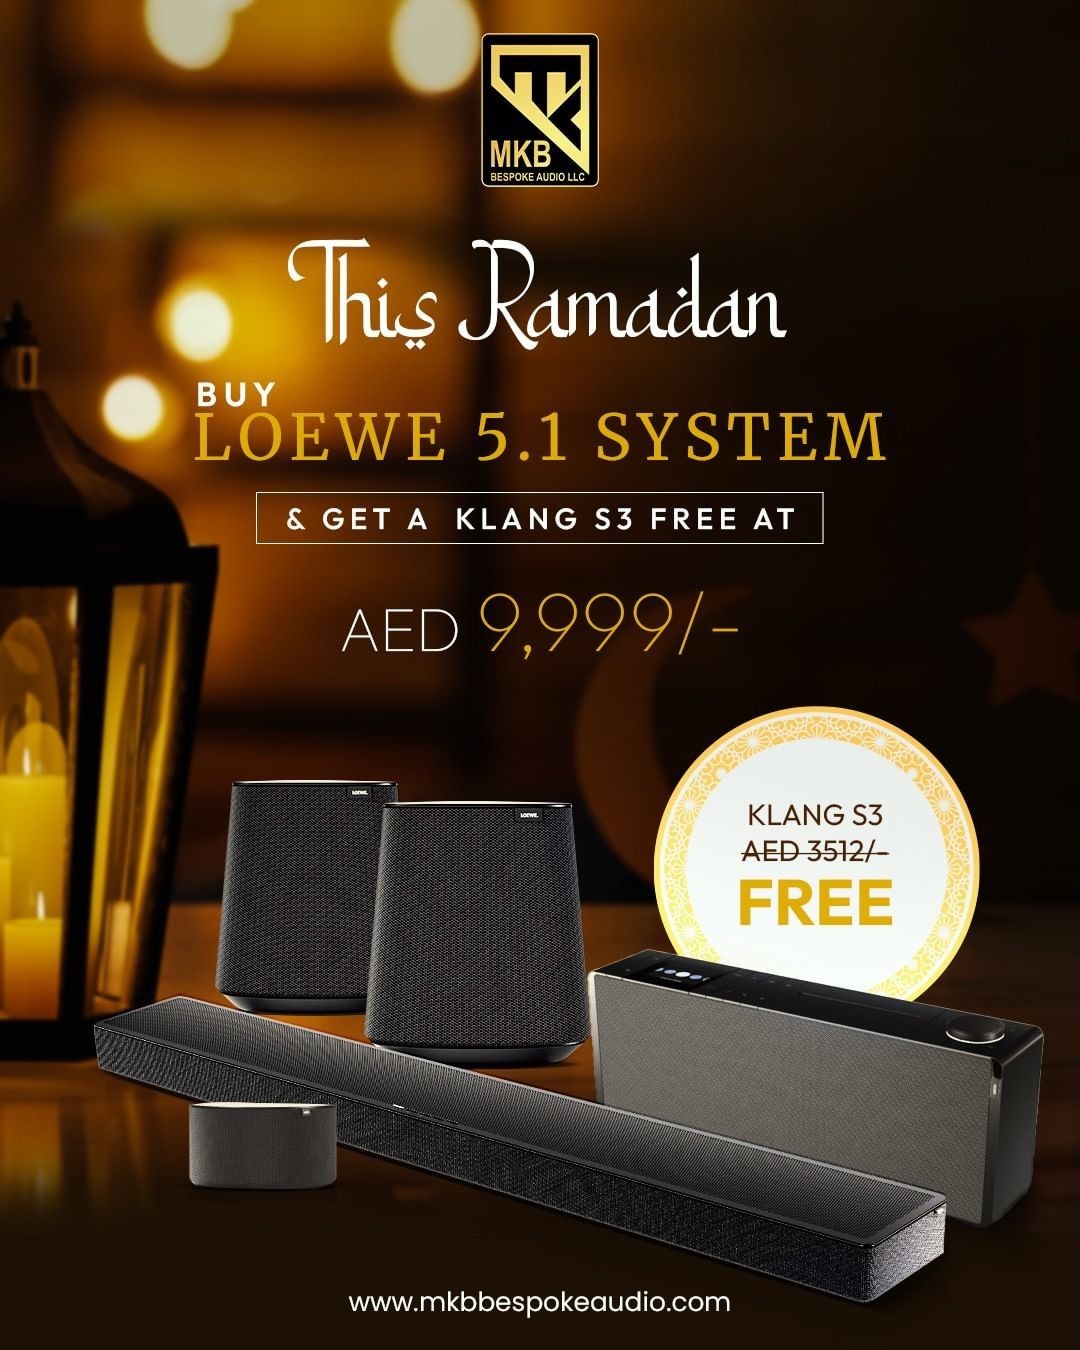 Ramadan, Get Loewe 5.1 System with a KLANG S3 FREE at AED 9,999